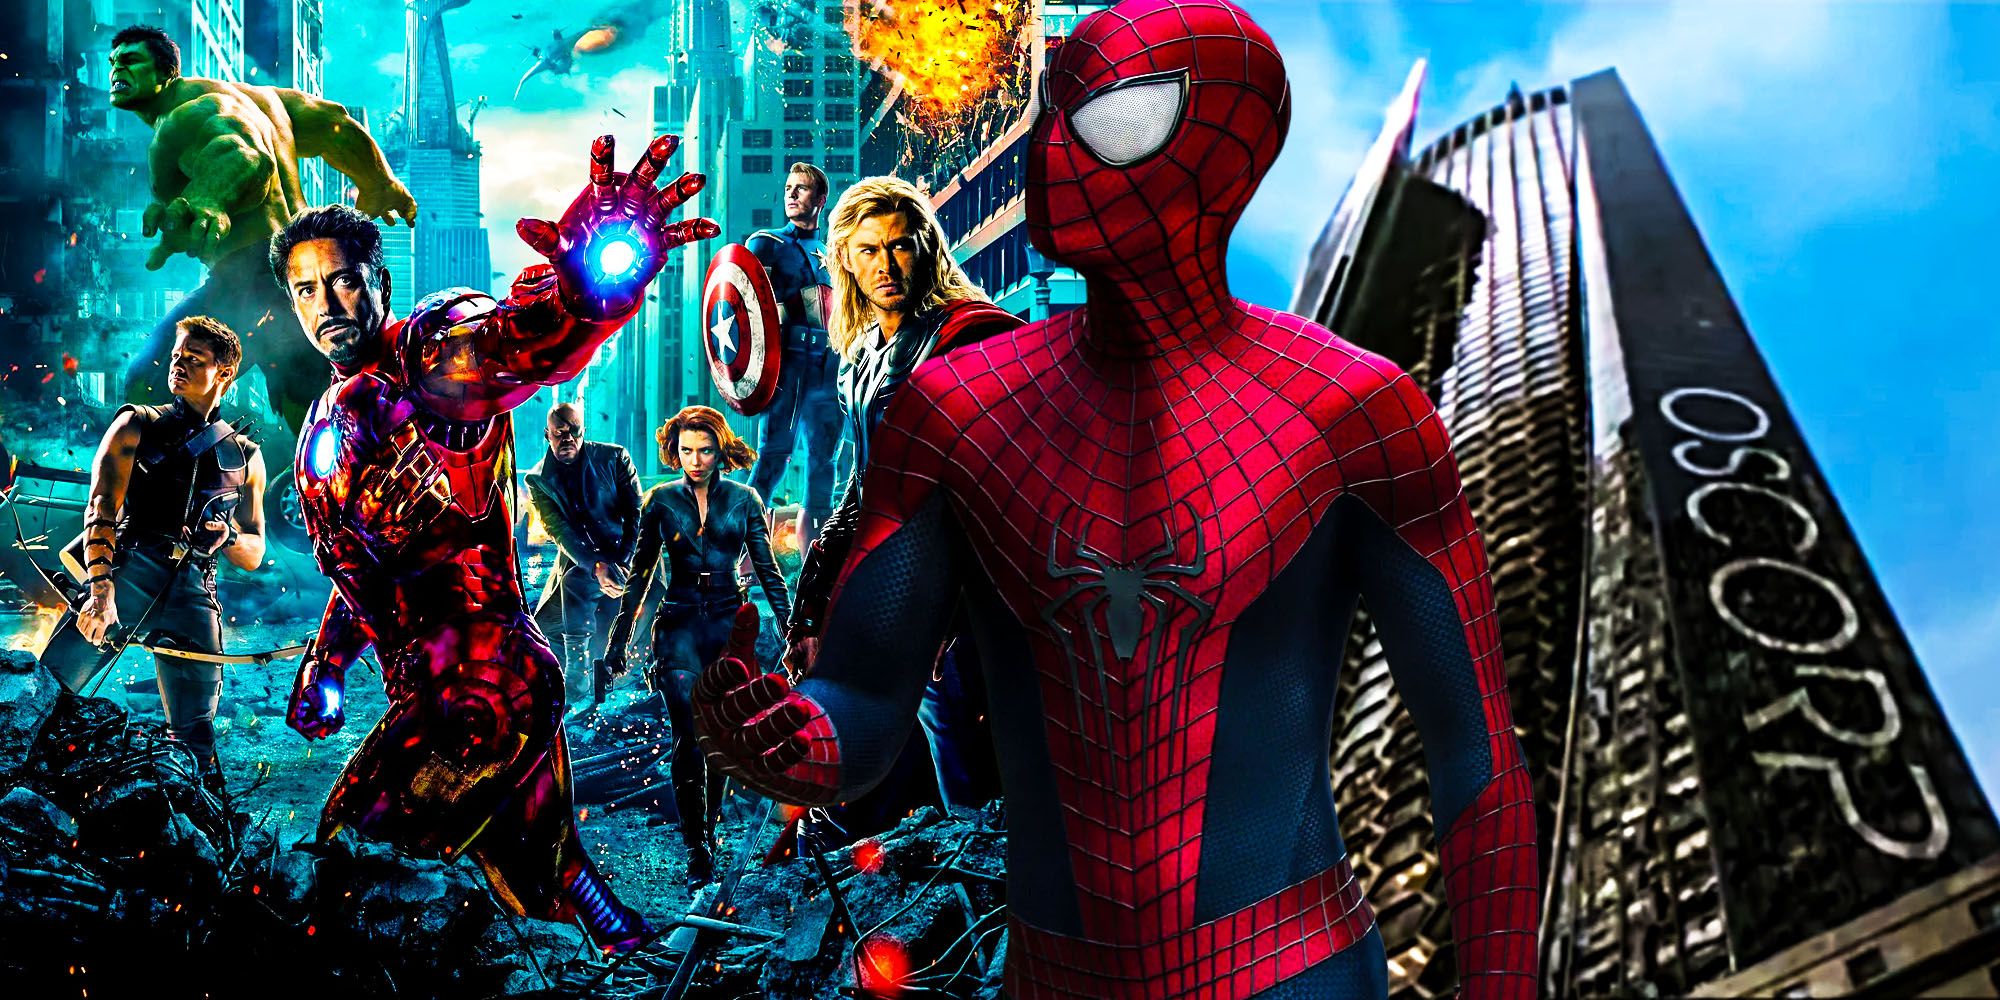 Andrew Garfield the amazing spiderman almost made MCU canon the avengers oscorp